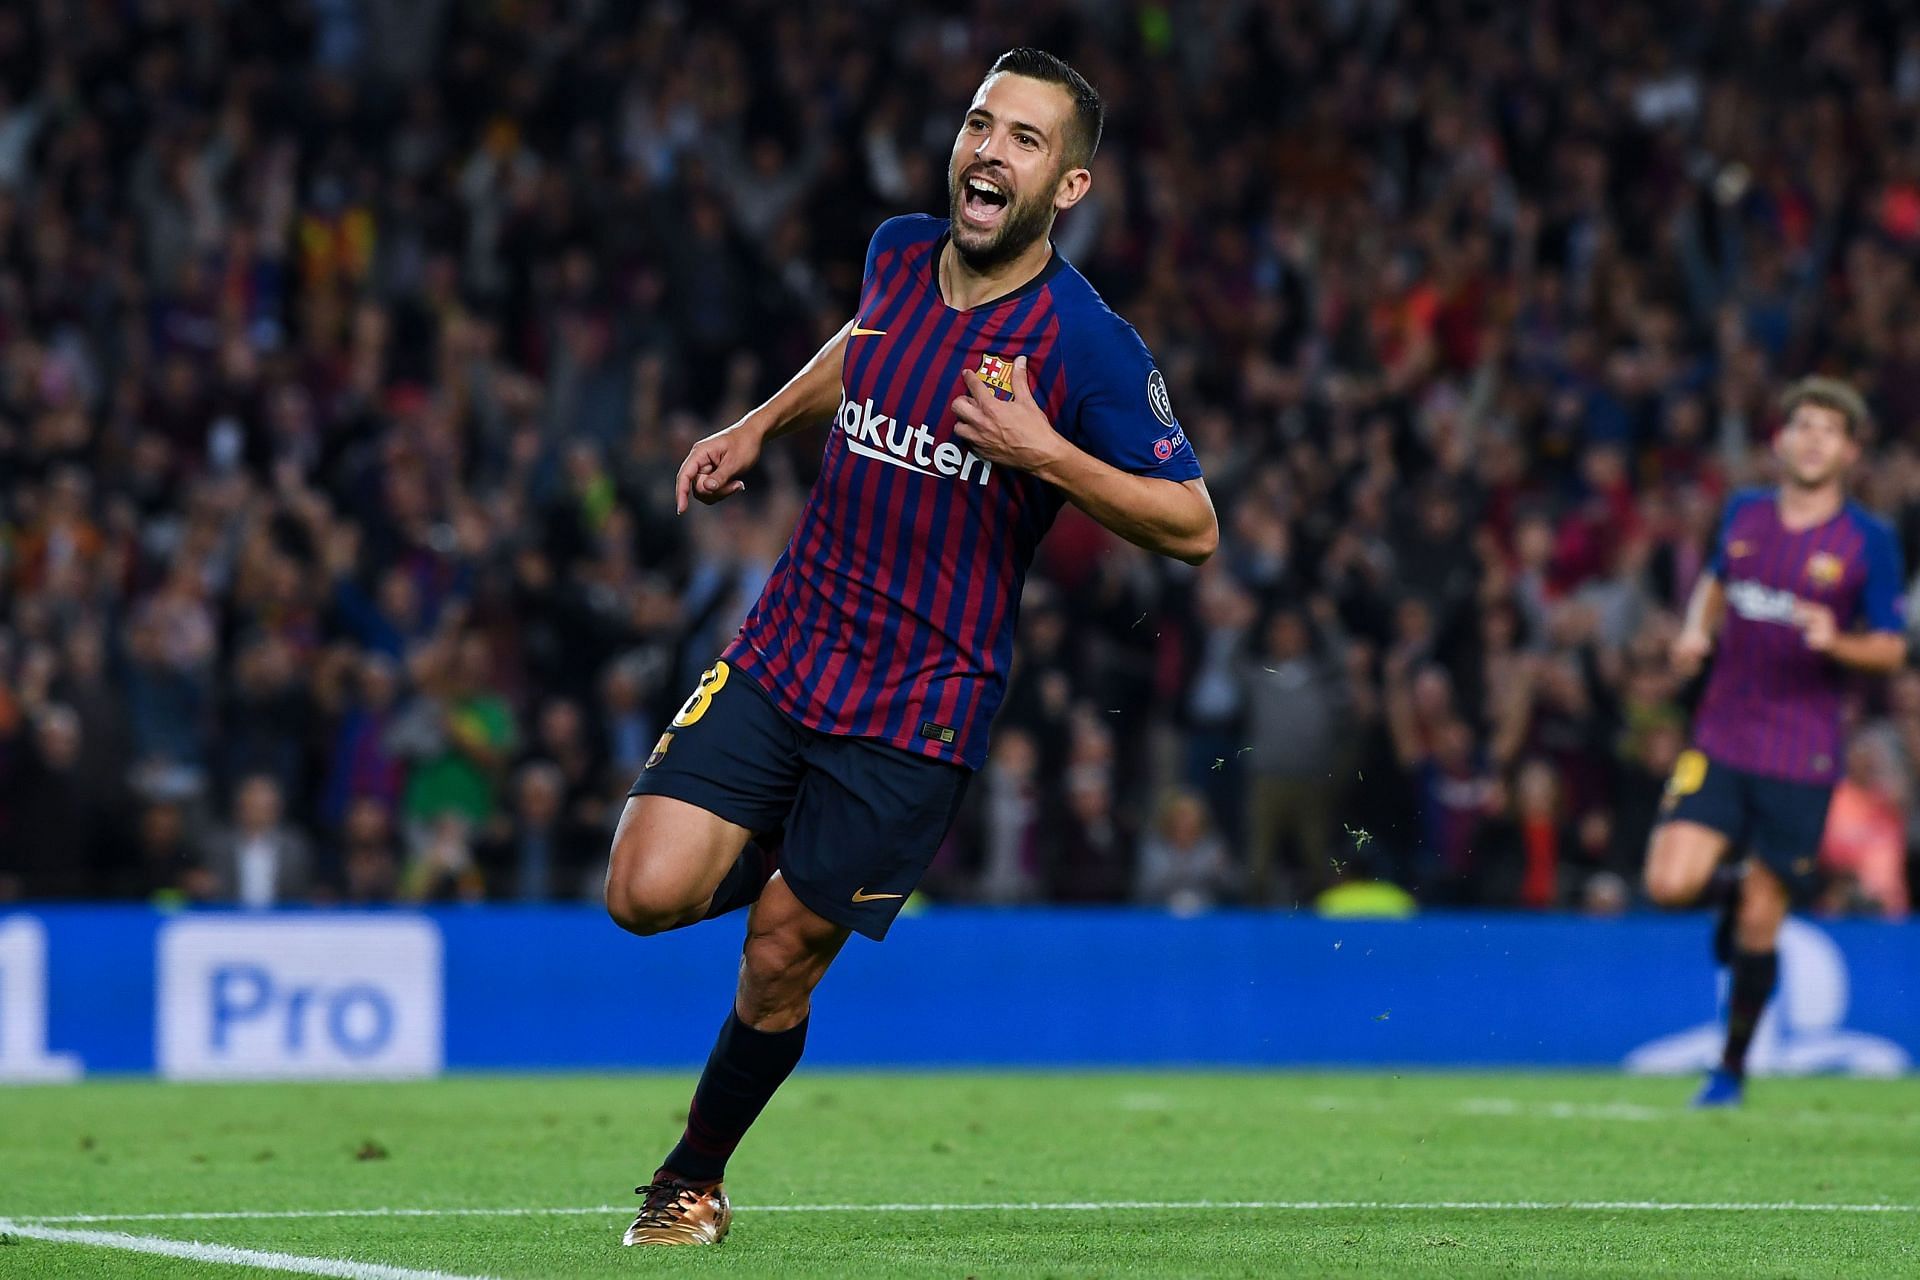 Jordi Alba is one of the best left-backs in the world right now